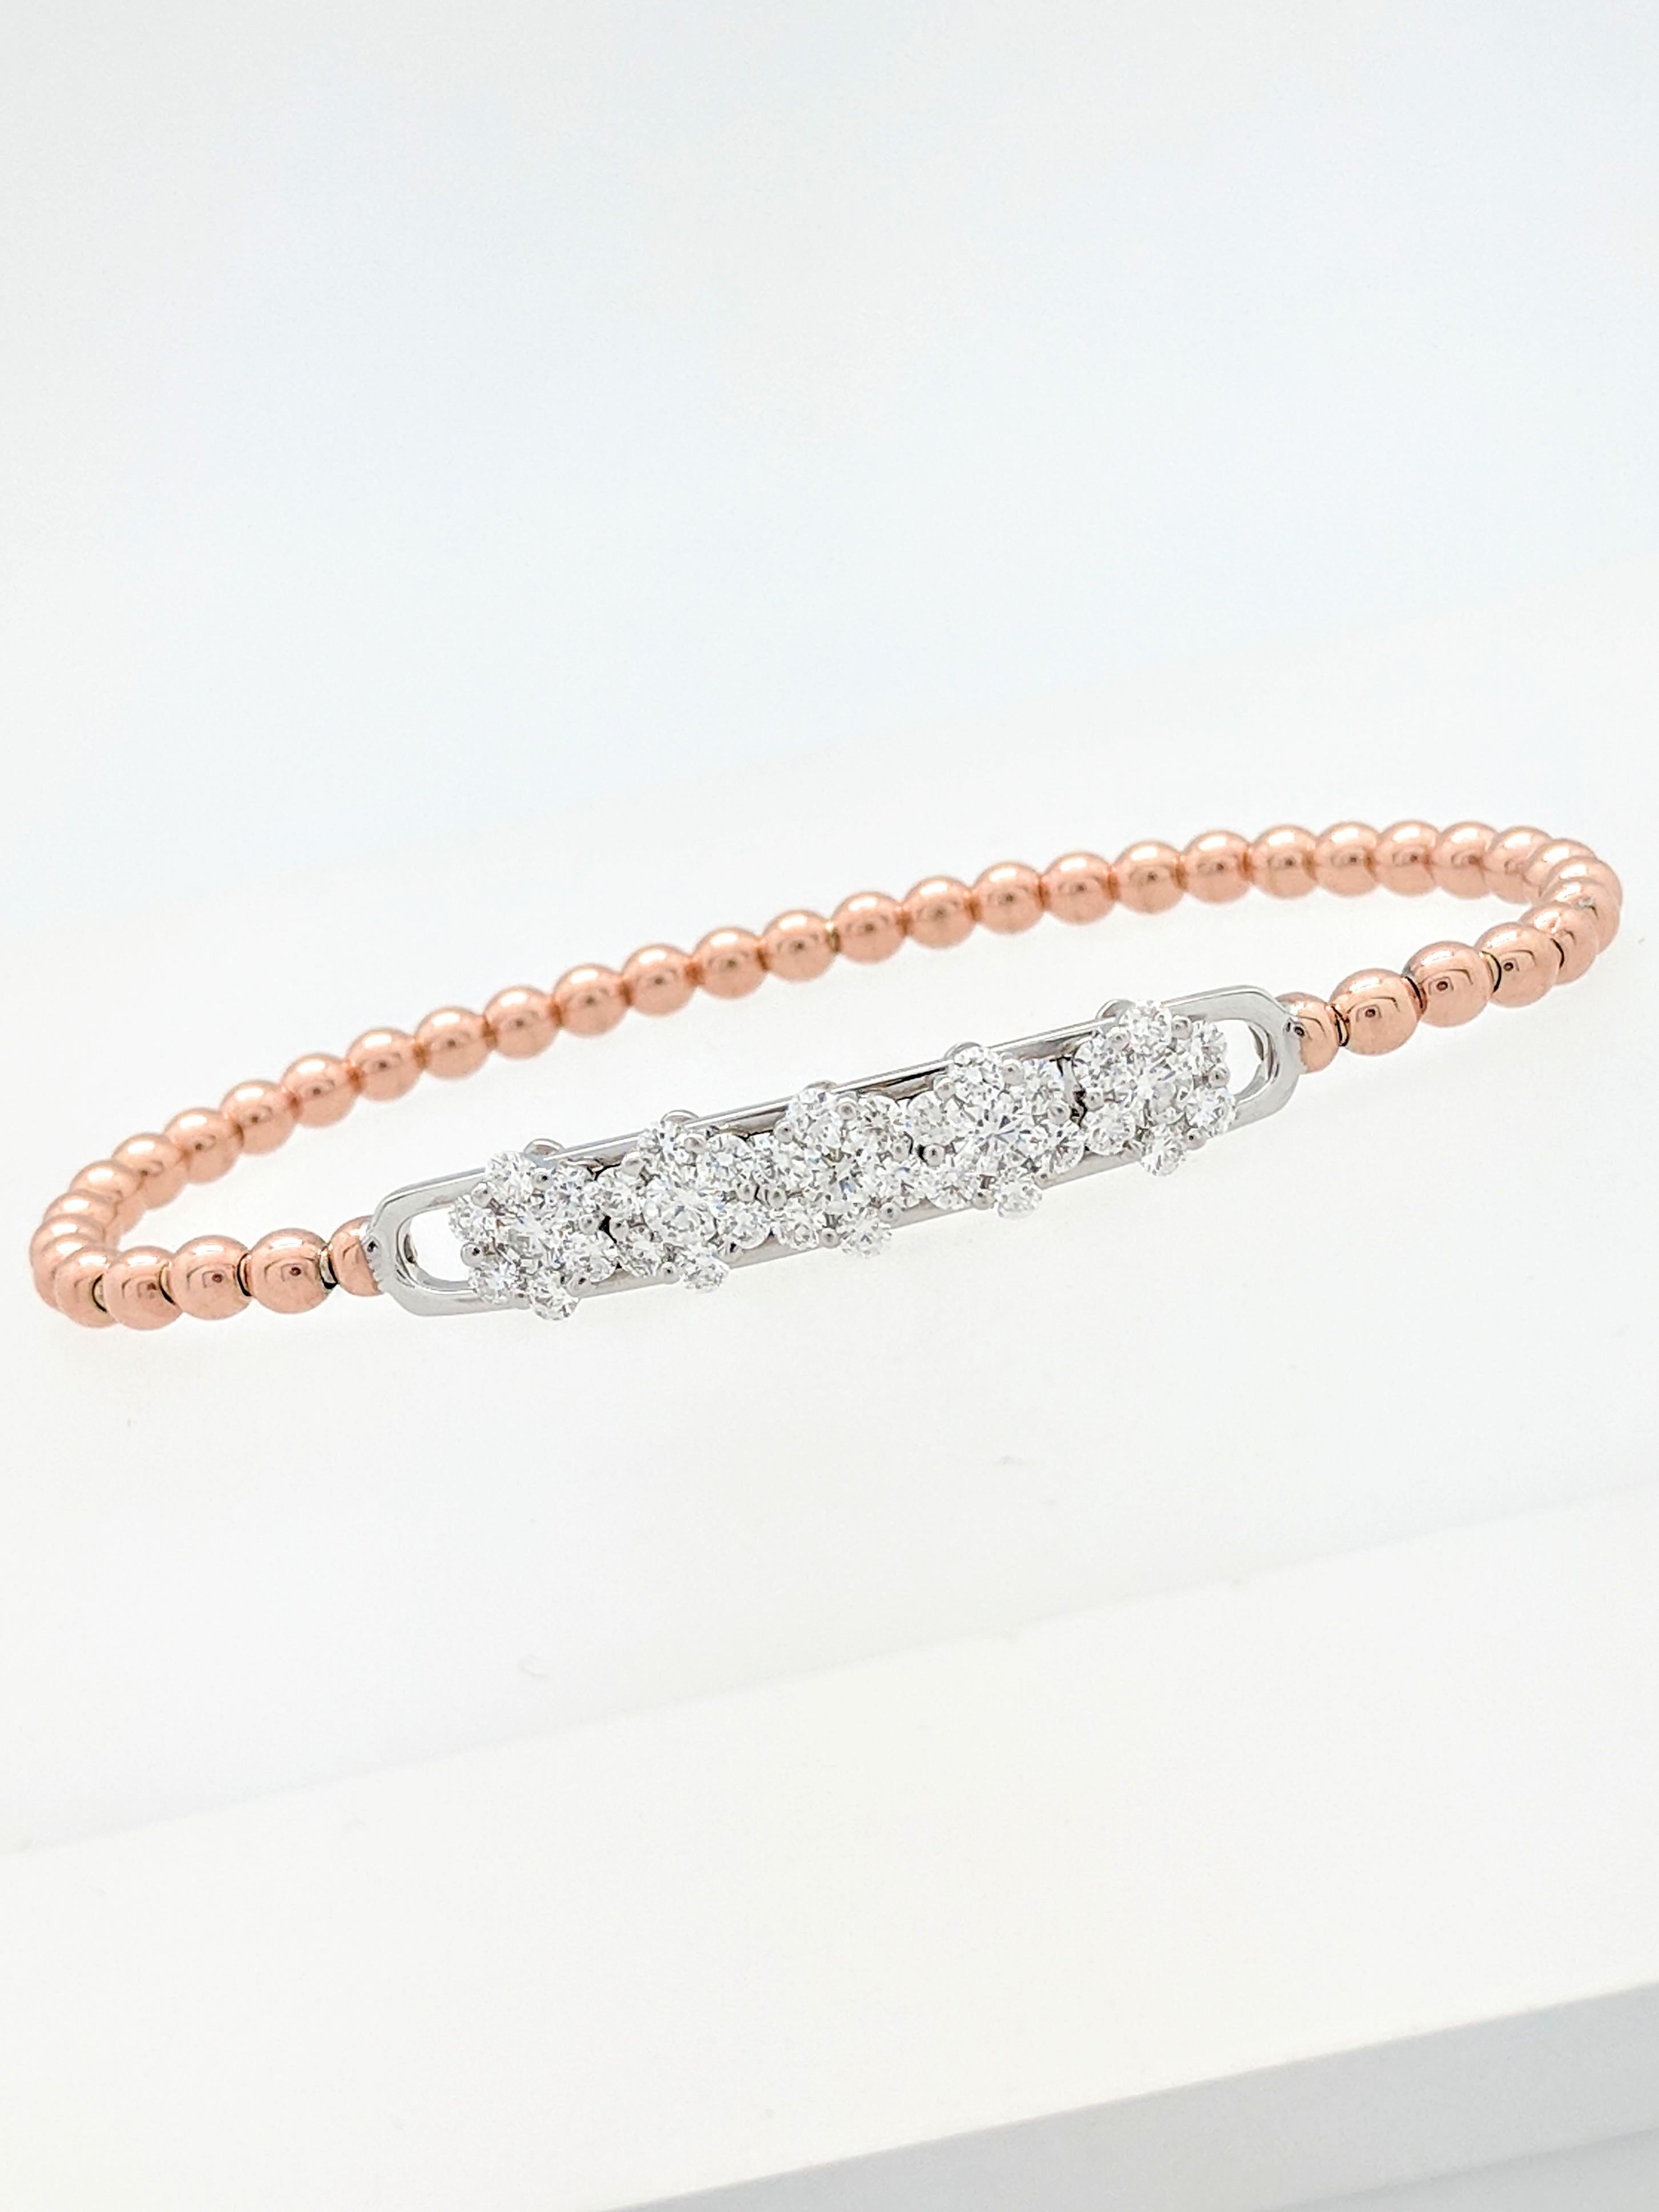 18k Rose & White Gold 1.41ctw Floating Diamond Stretchable Beaded Bracelet

You are viewing a Beautiful Floating Diamond Stretchable Beaded Bracelet that is sure to make a statement!

The bracelet is crafted from 18k rose and white gold and weighs